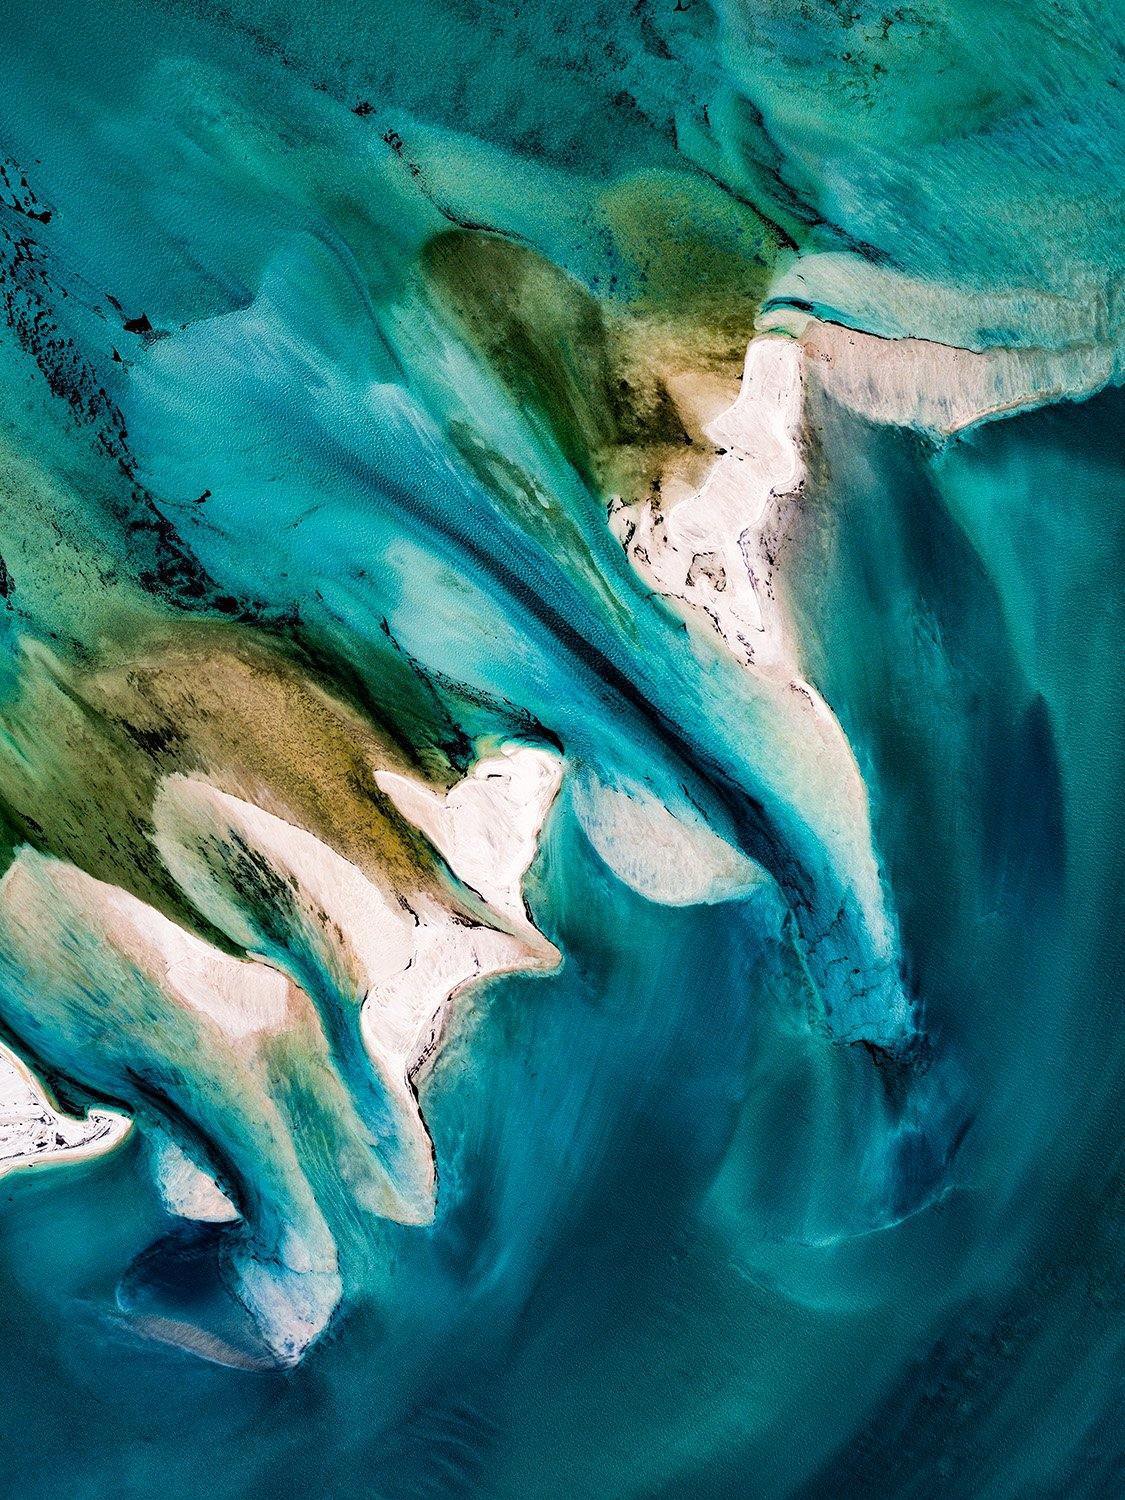 A beautiful oil painting of a steady oceanic flow of water with some green shades of underwater grass, Blue 